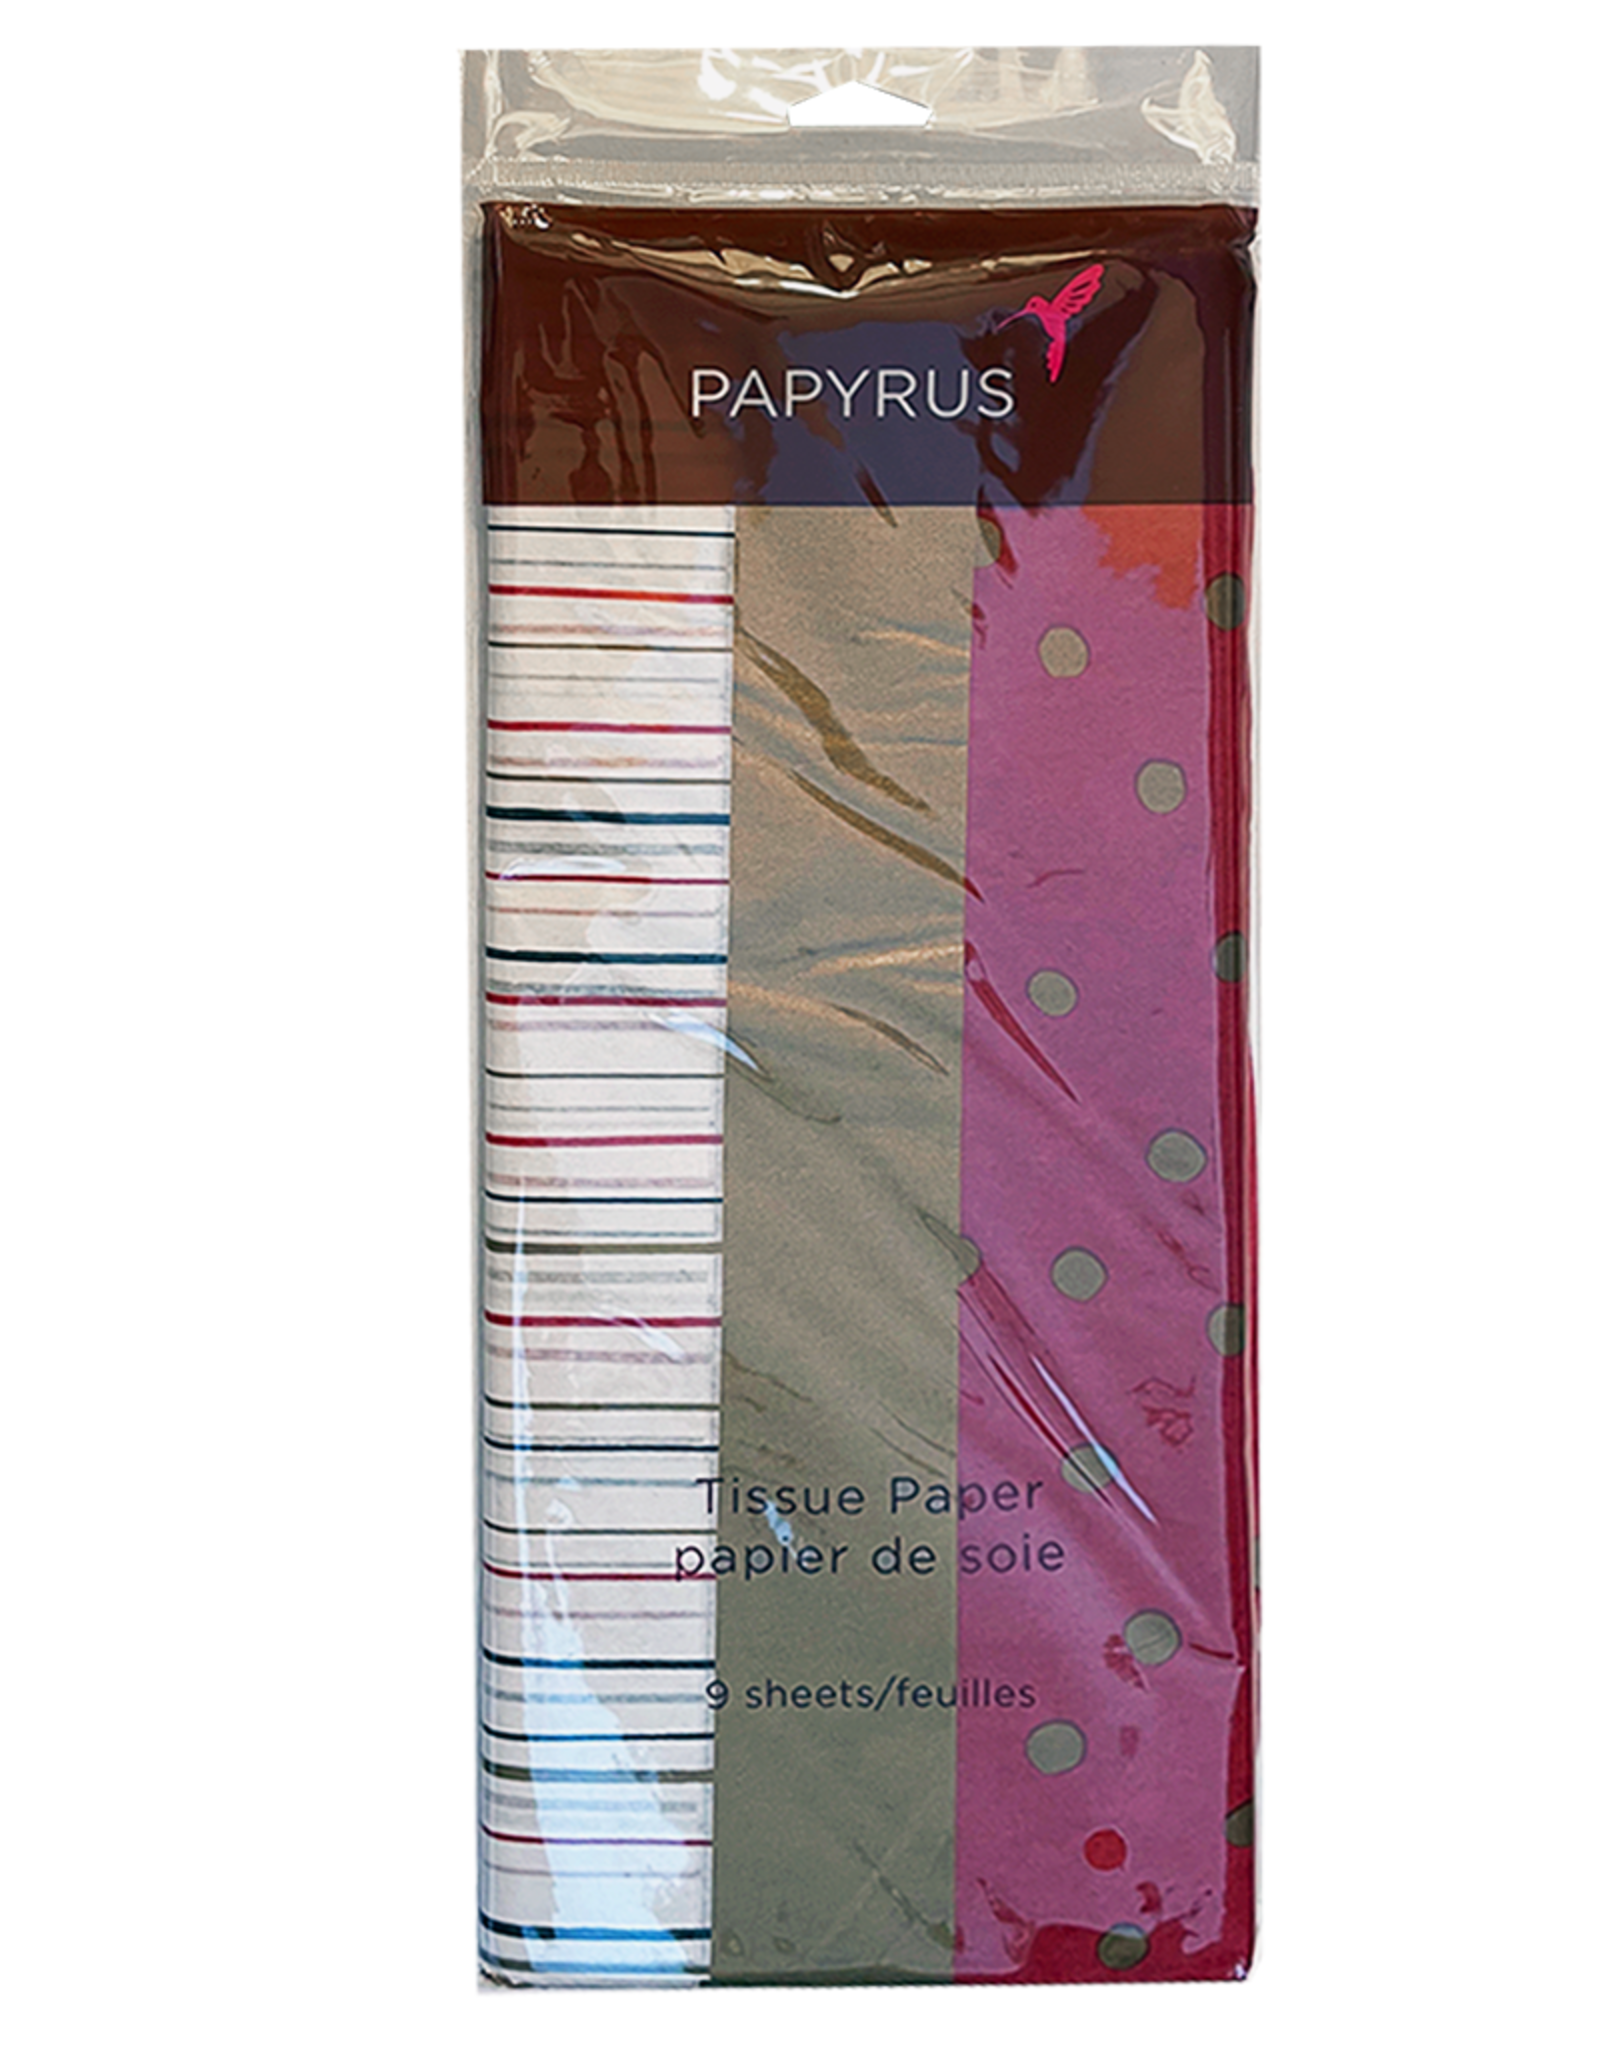 Papyrus Christmas Tissue Paper 9 Sheets Christmas Joy - Digs N Gifts